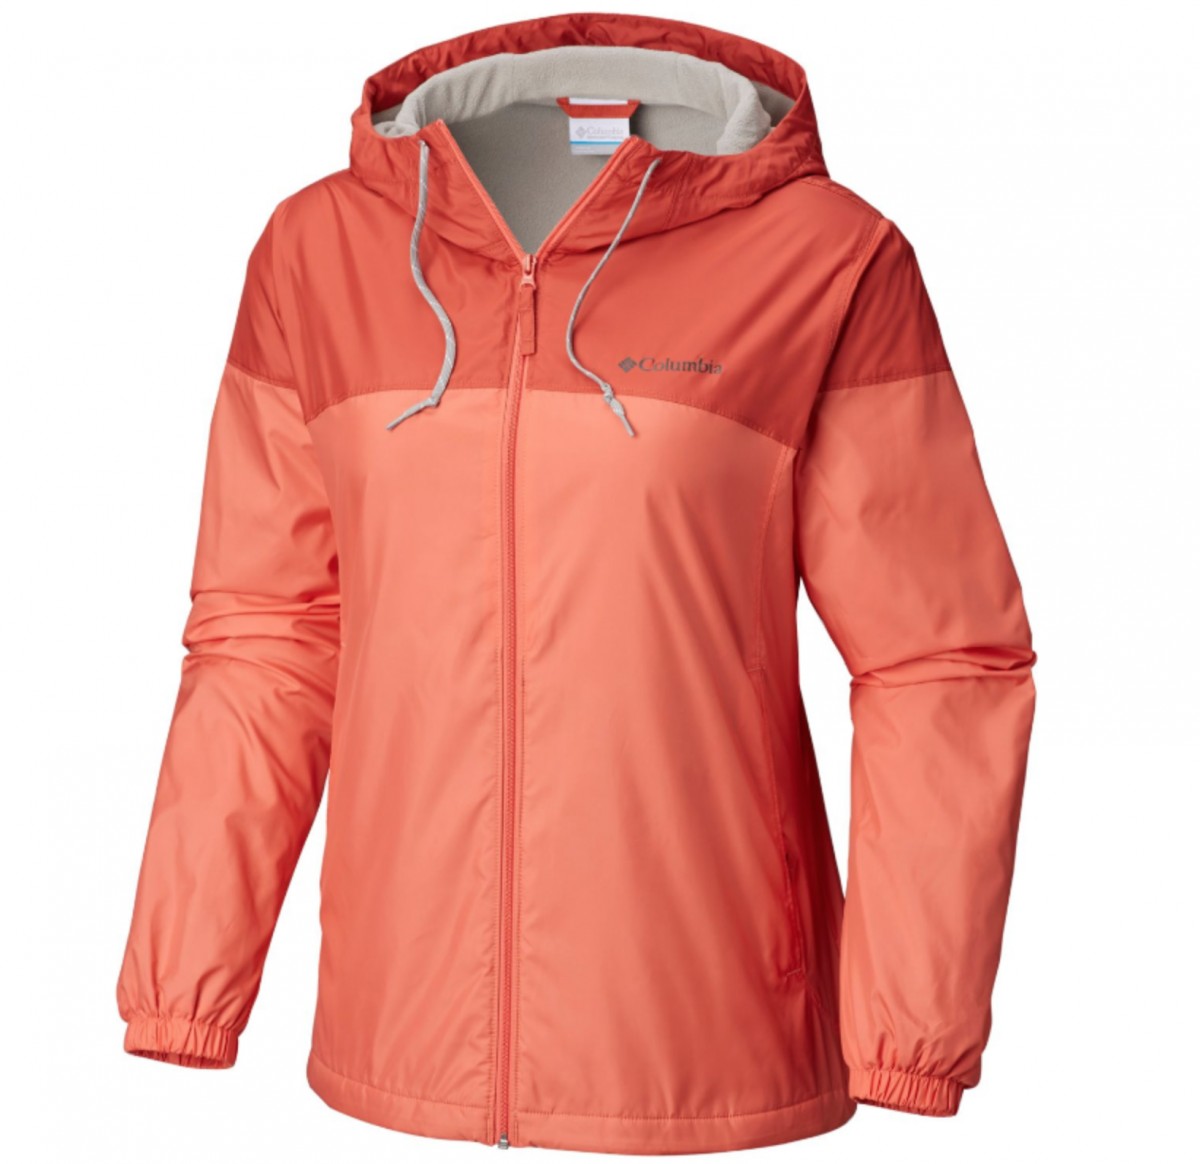 Columbia Flash Forward Lined - Women's Review | Tested by GearLab